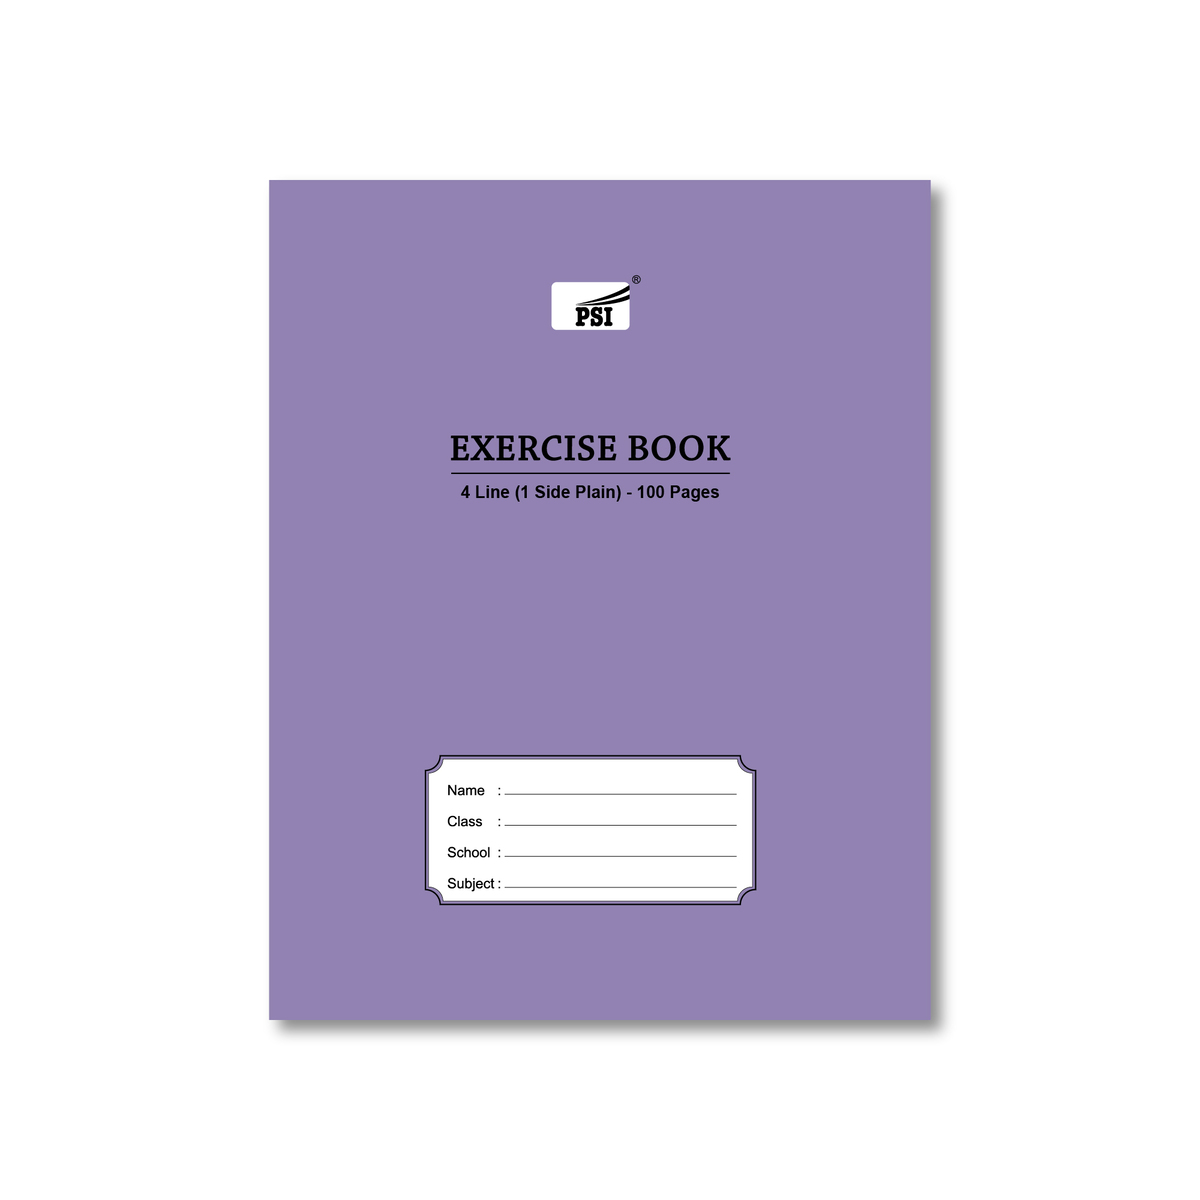 PSI Exercise Book 4 Line (1 Side Plain) 100 Pages 4LM100